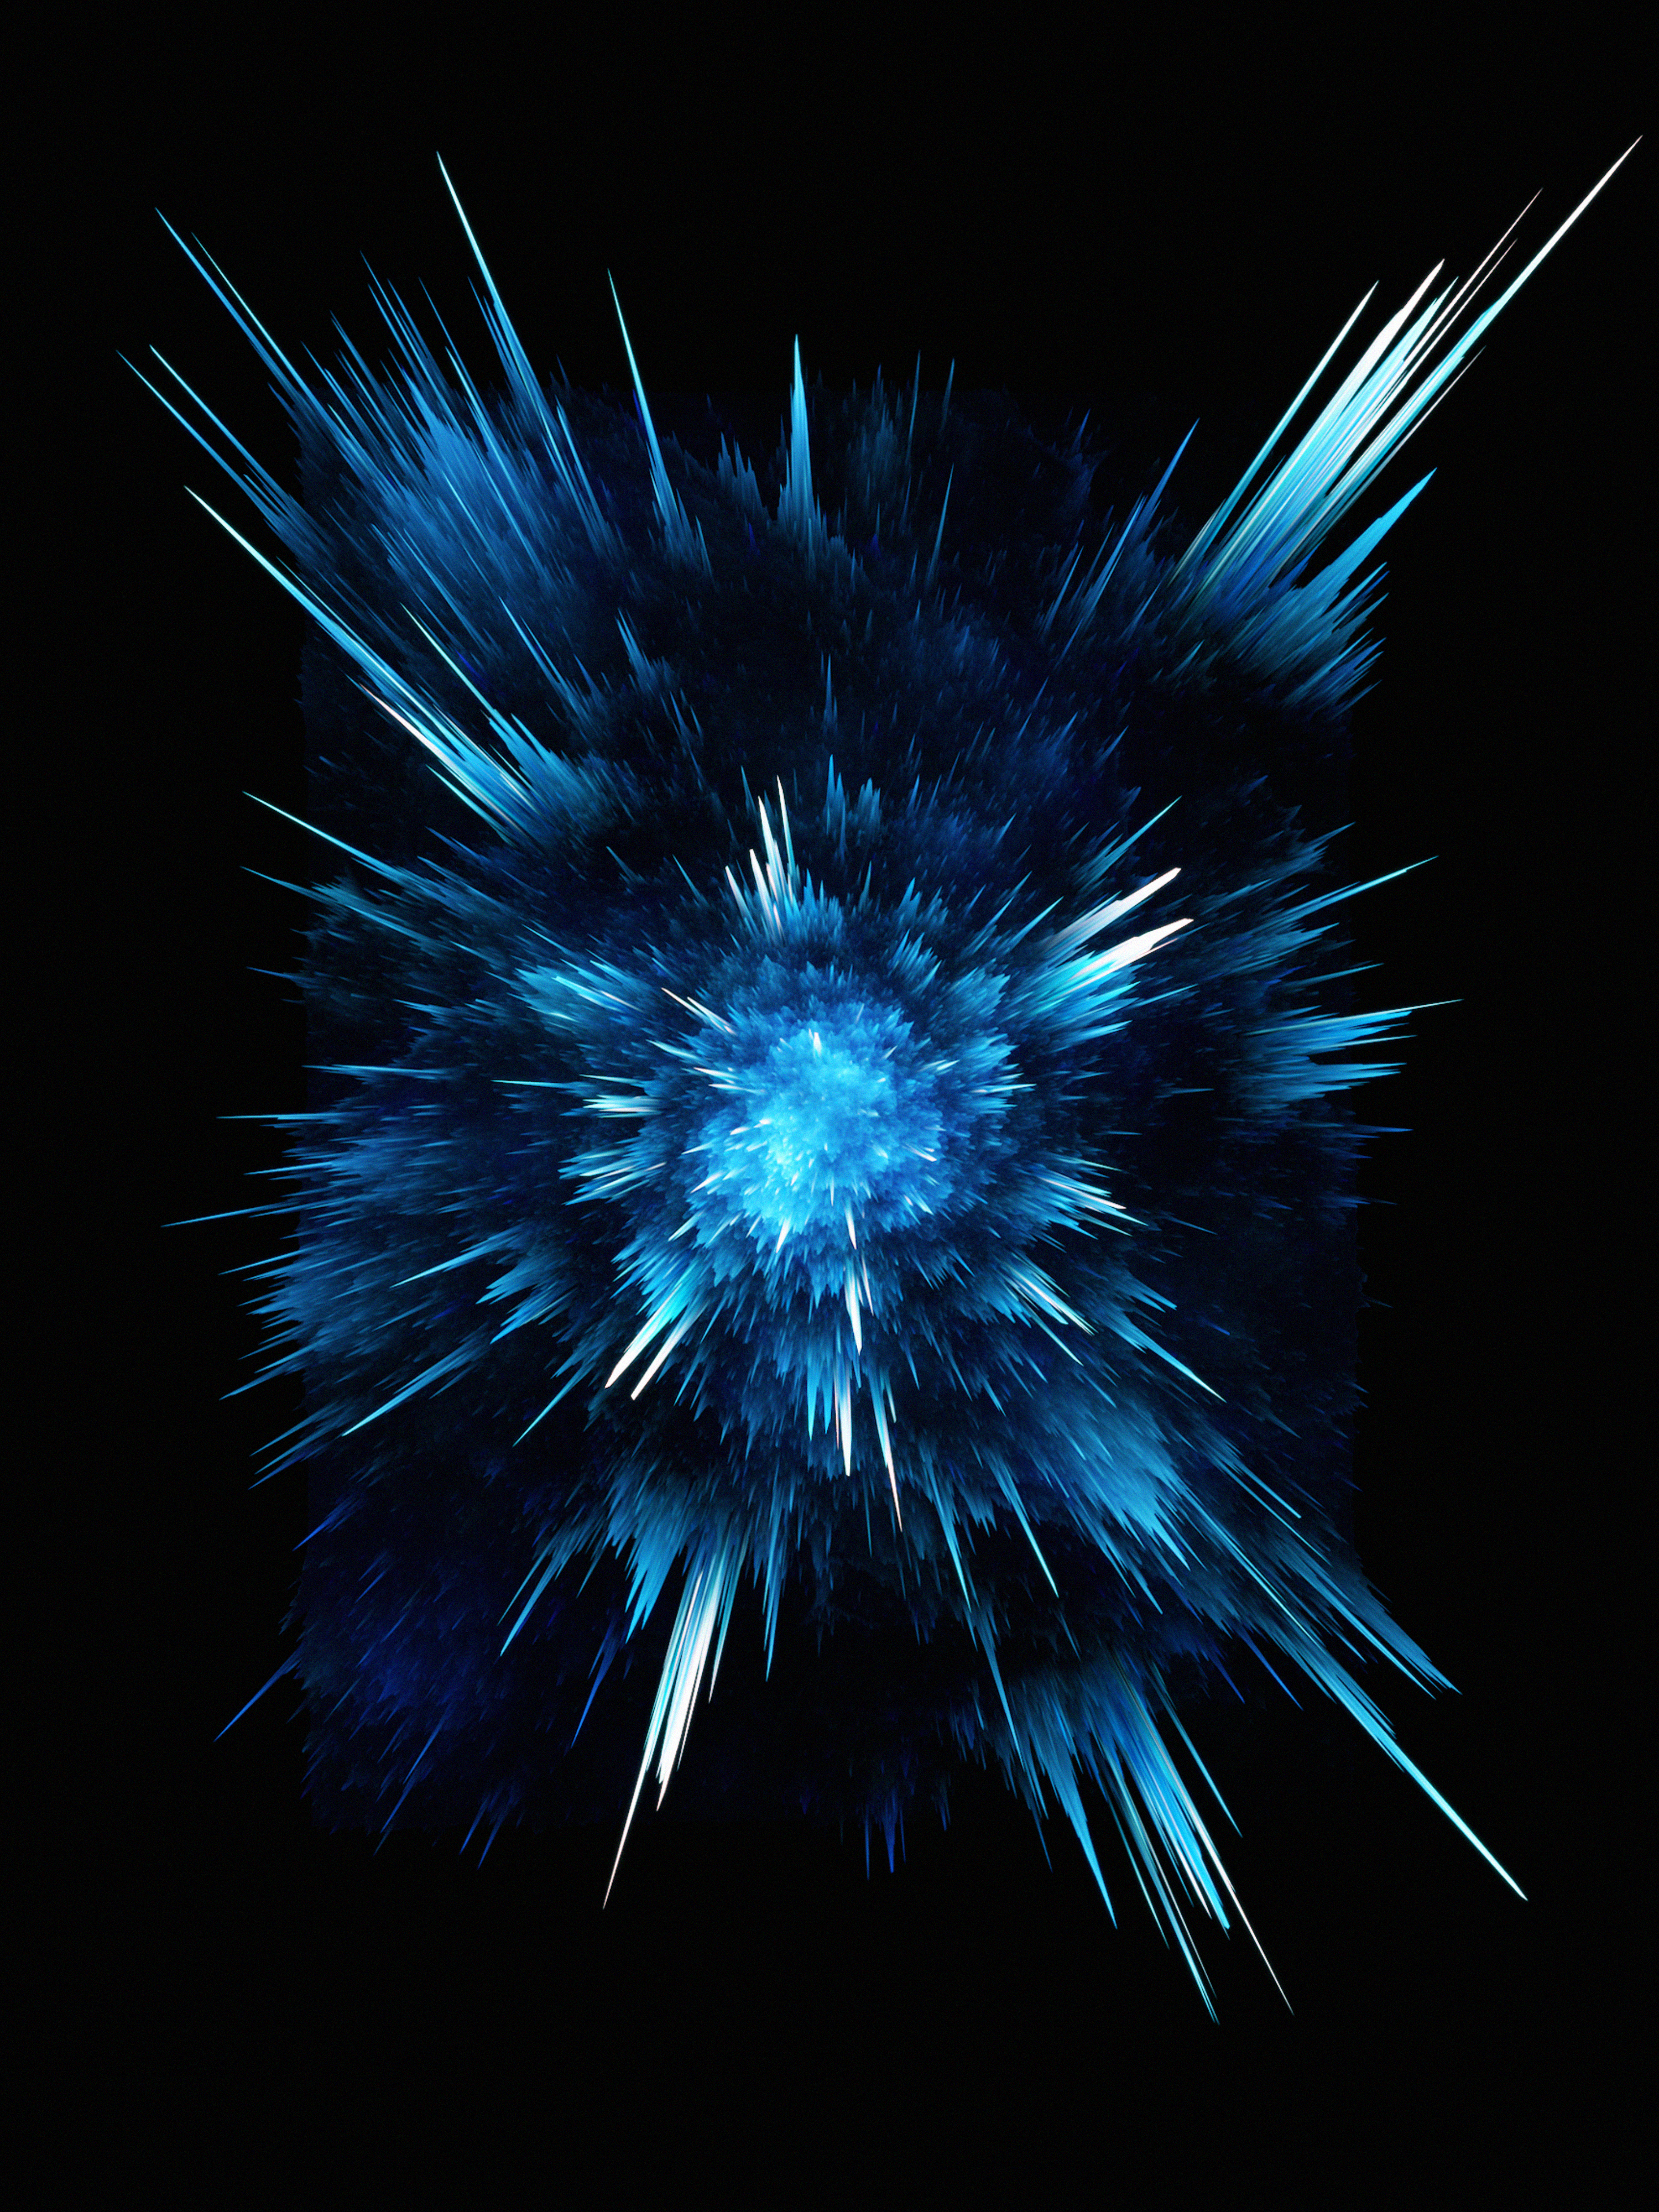 blue, lines, abstract, dark, explosion